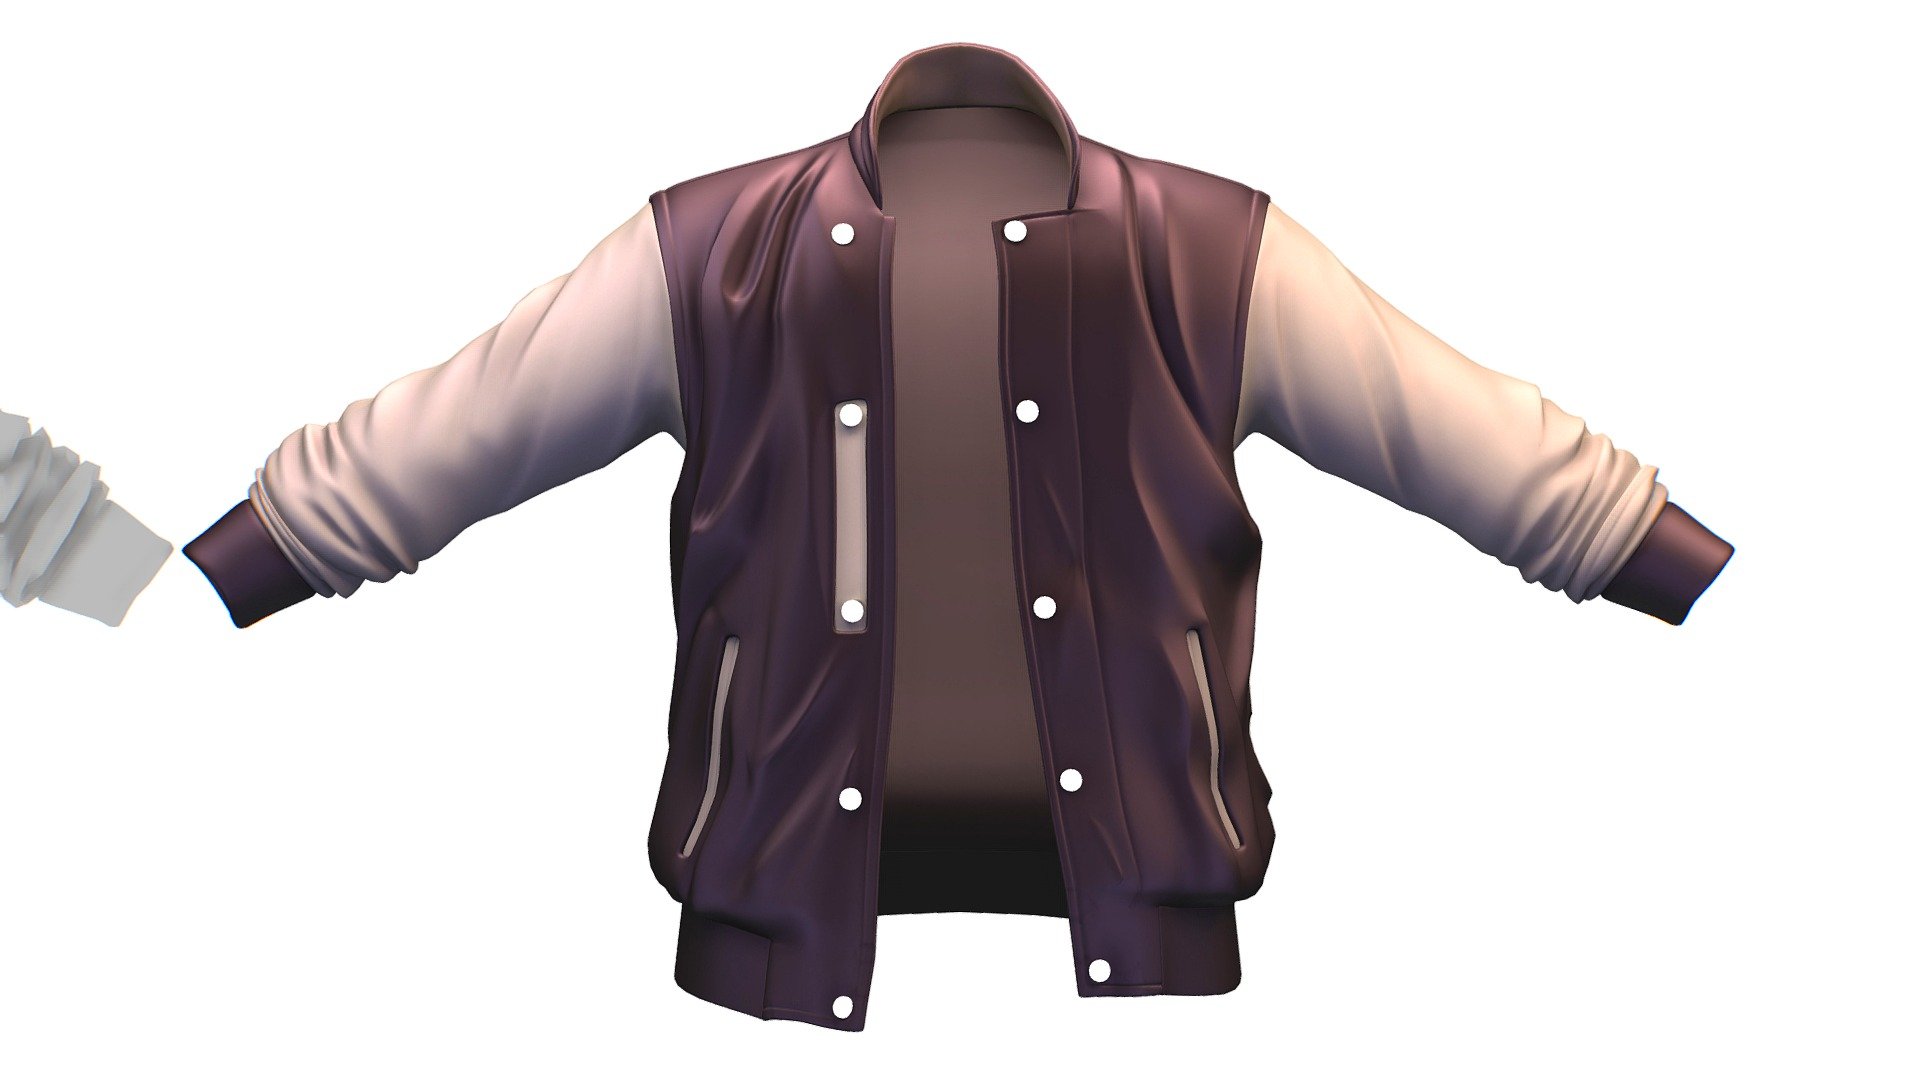 Cartoon High Poly Subdivision Jacket 020

No HDRI map, No Light, No material settings - only Diffuse/Color Map Texture (4000х4000)

More information about the 3D model: please use the Sketchfab Model Inspector - Key (i) - Cartoon High Poly Subdivision Jacket 020 - Buy Royalty Free 3D model by Oleg Shuldiakov (@olegshuldiakov) 3d model